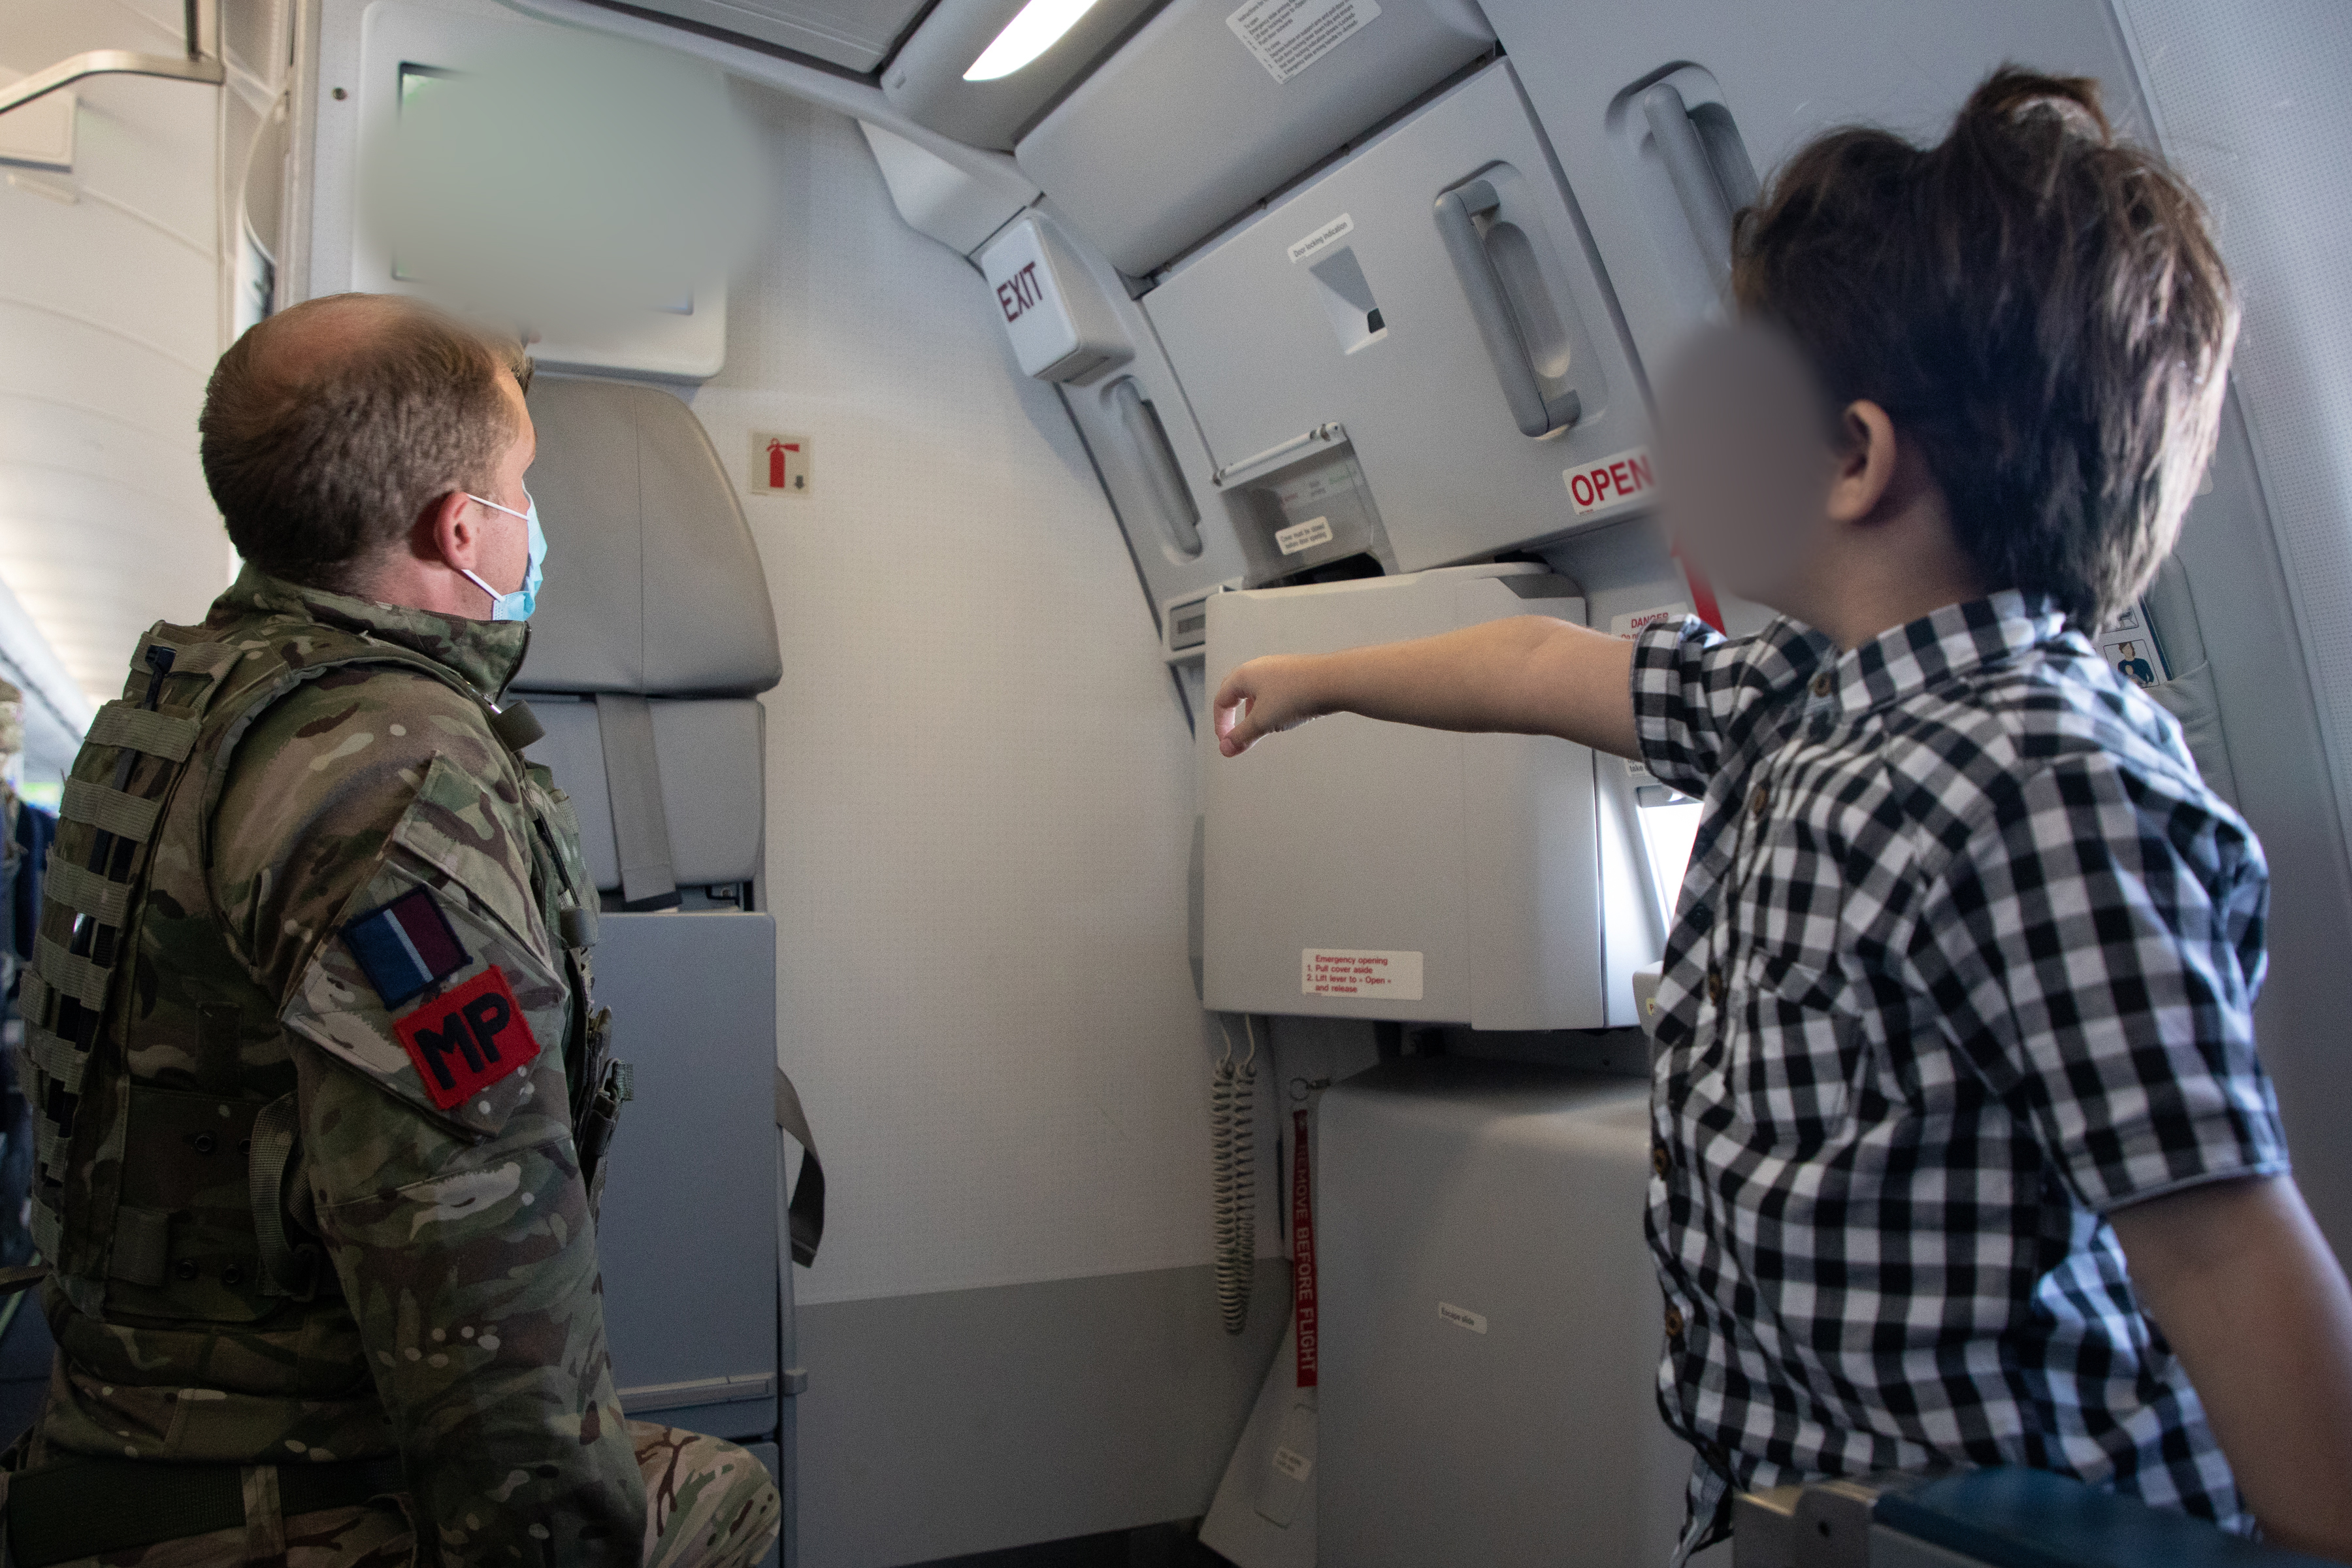 RAF Police and young passenger look at emergency escape door inside aircraft.